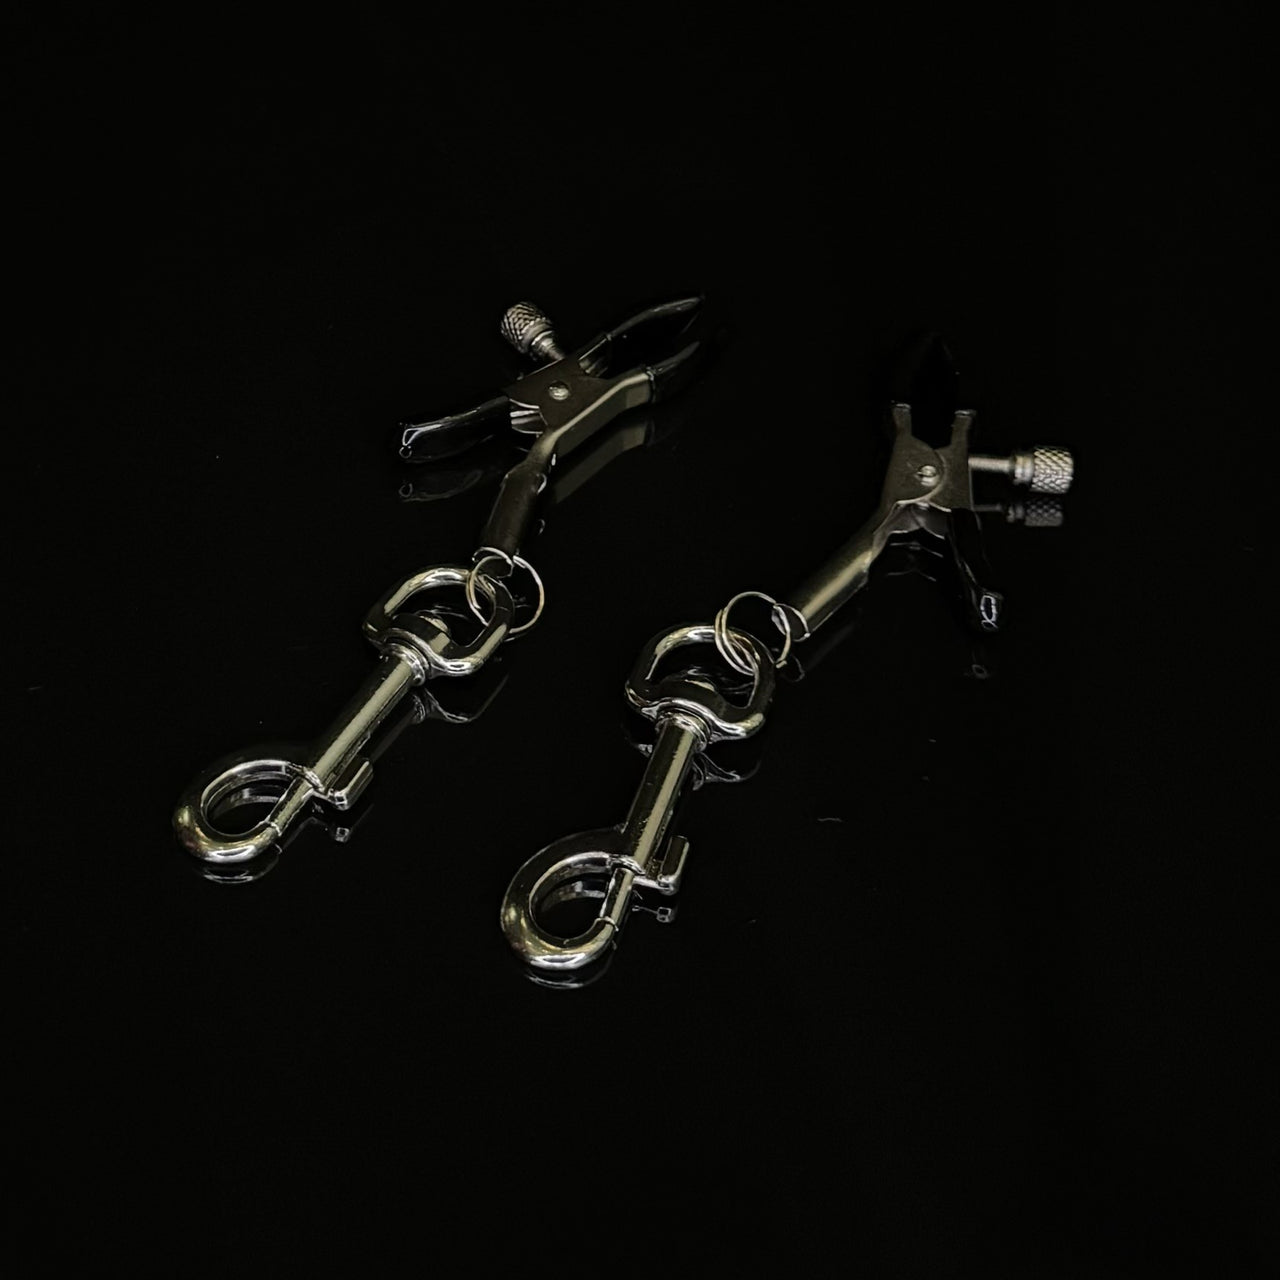 Adjustable Metal Nipple Clamps WIth Clips for Added Wright Non-Piercing Clamp Set Precision Tension Control for Enhanced BDSM Sensory Play